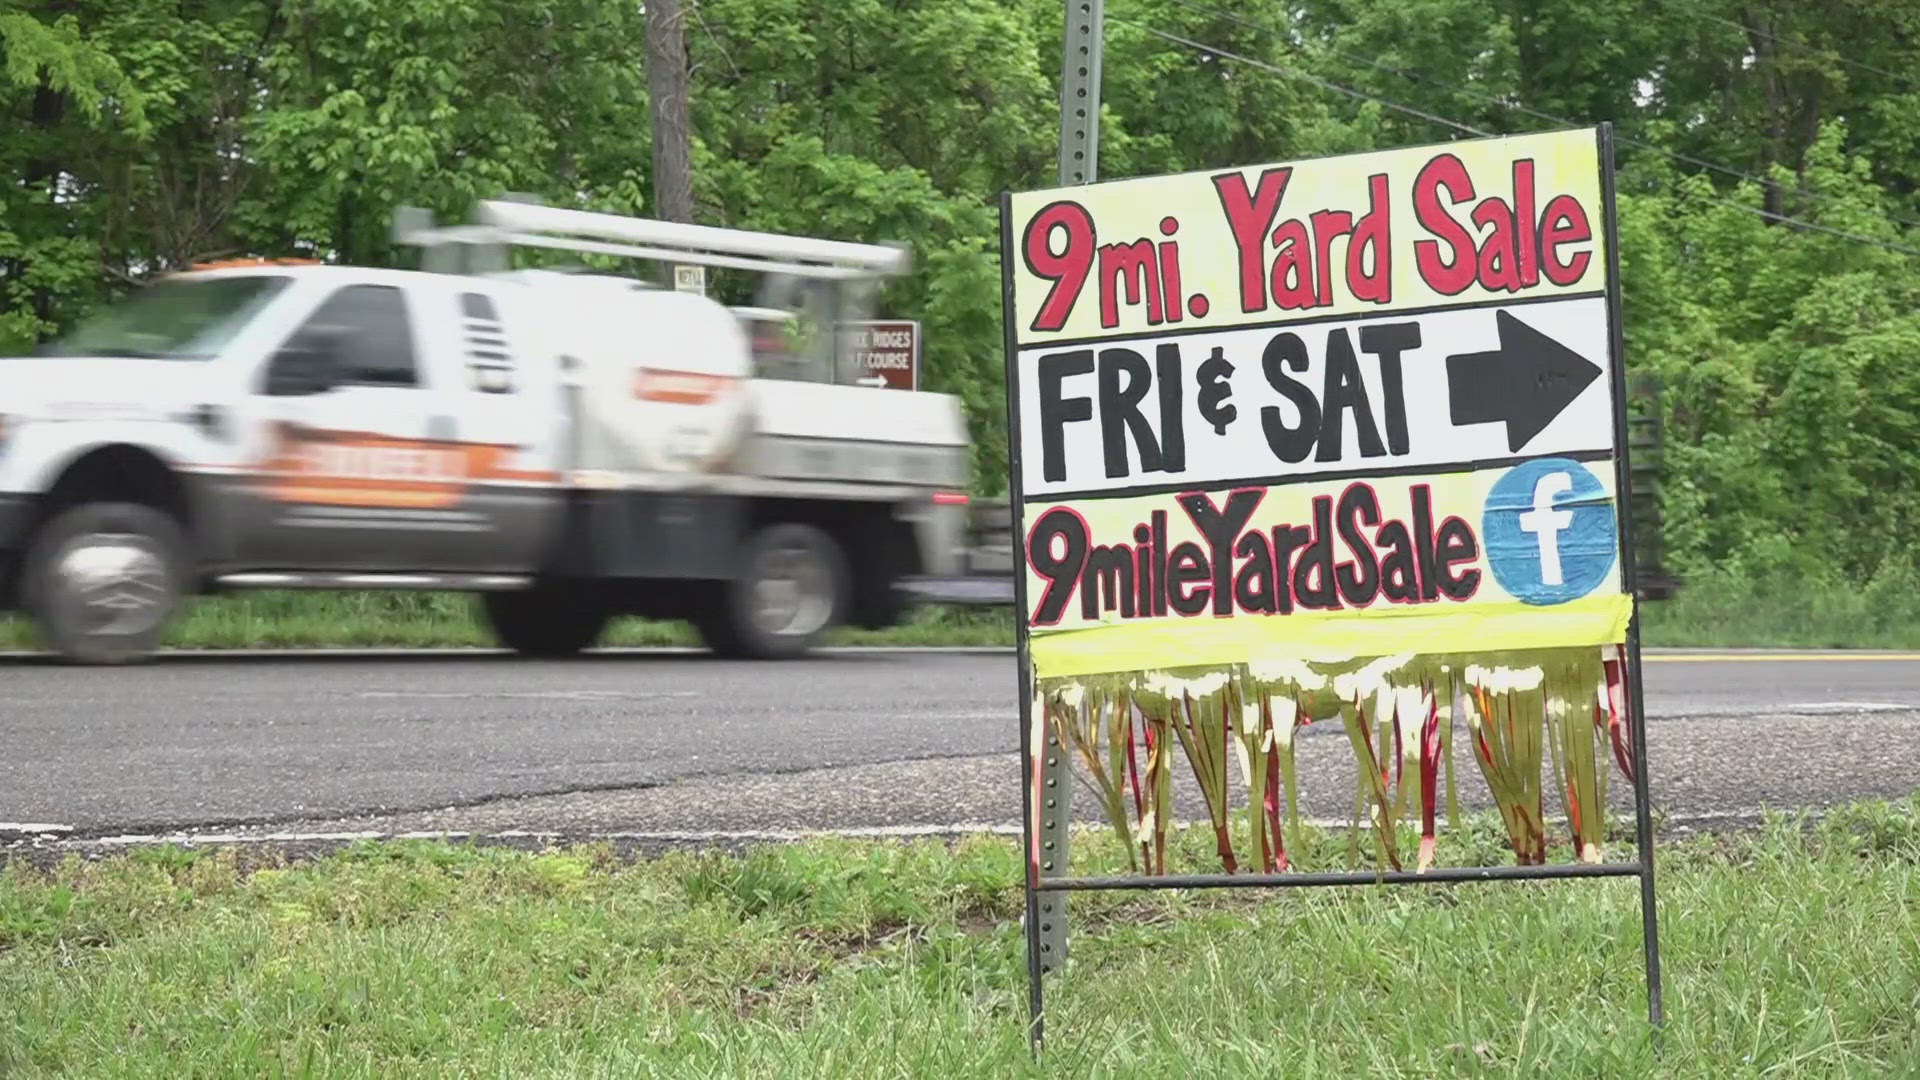 The neighborhoods along Ridgeview Road opened their mile yard sale, running nine miles from one end of Tazewell Pike across Ridgeview Road.